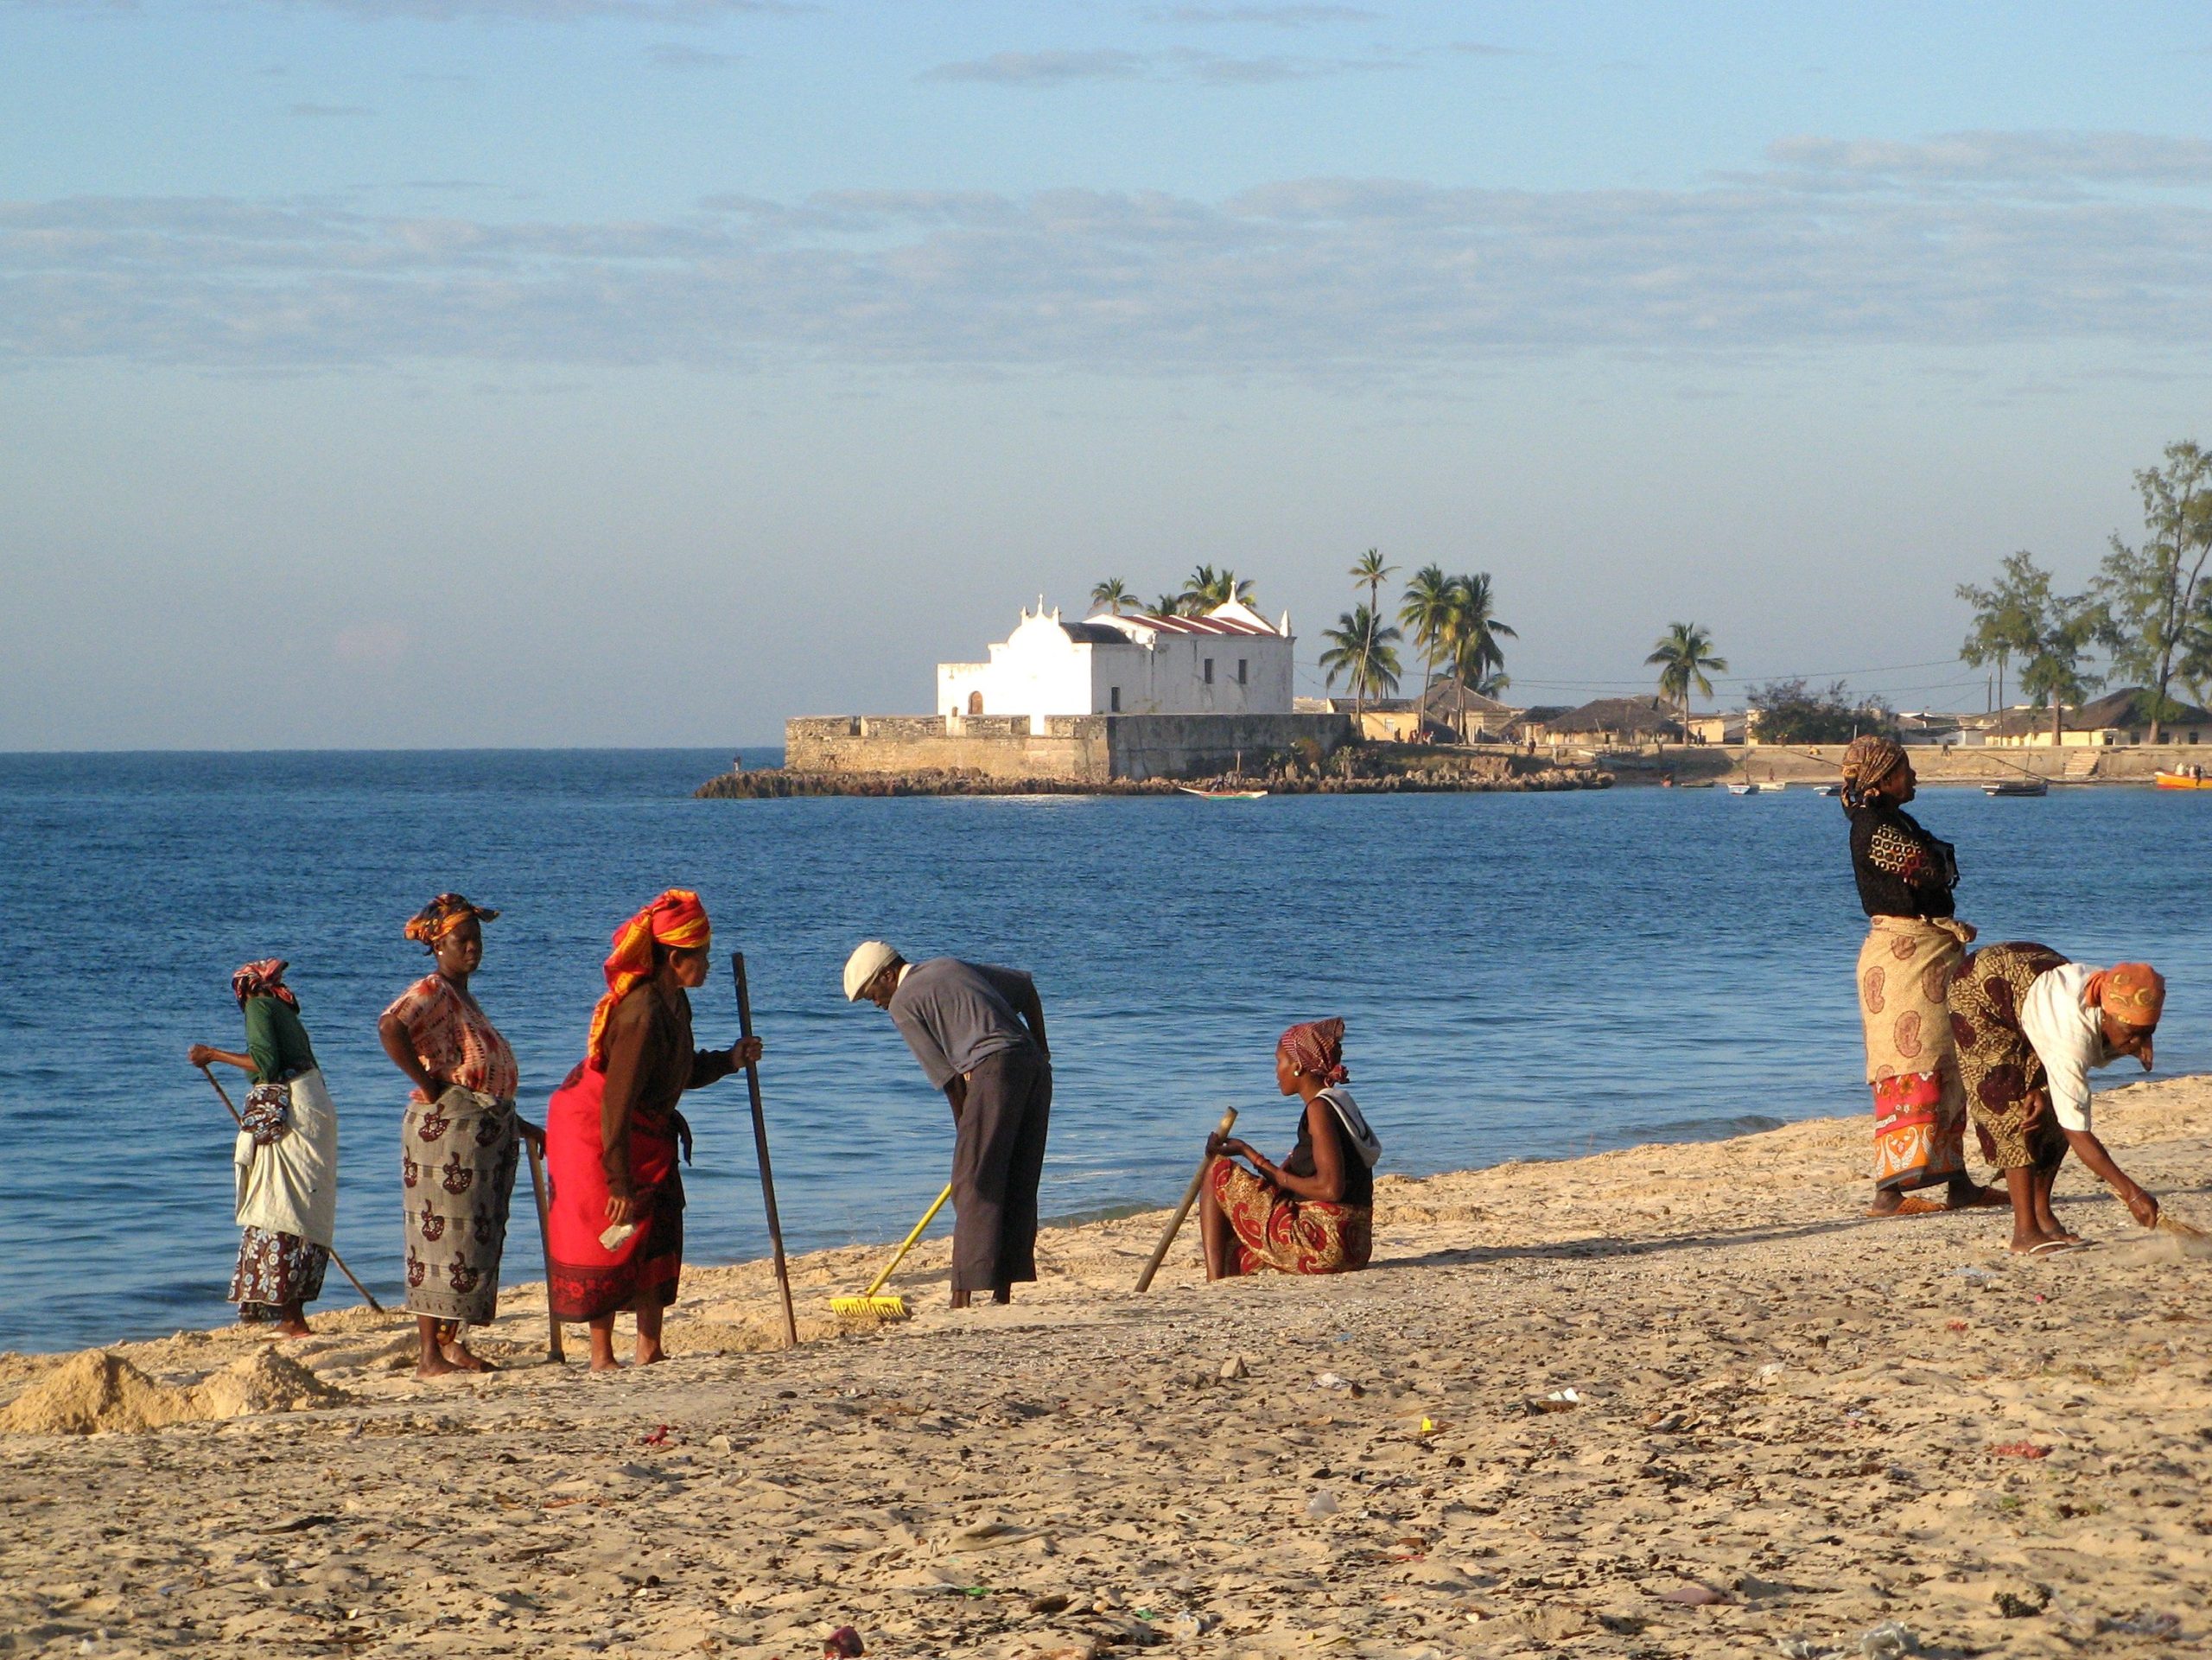 Mozambican people on the beach